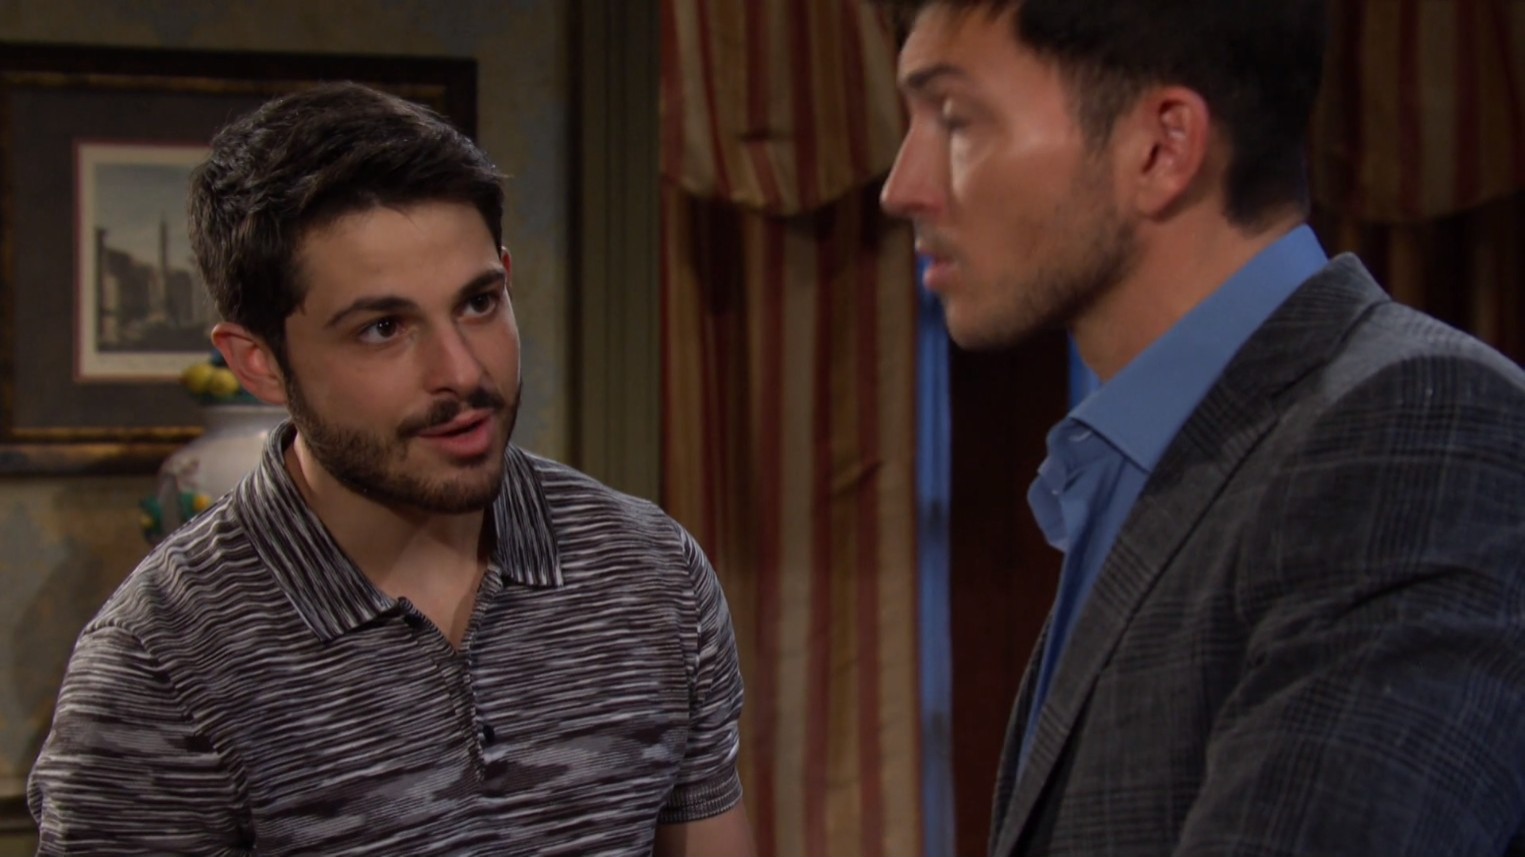 sonny says alex made a mistake Days recap soapsspoilers